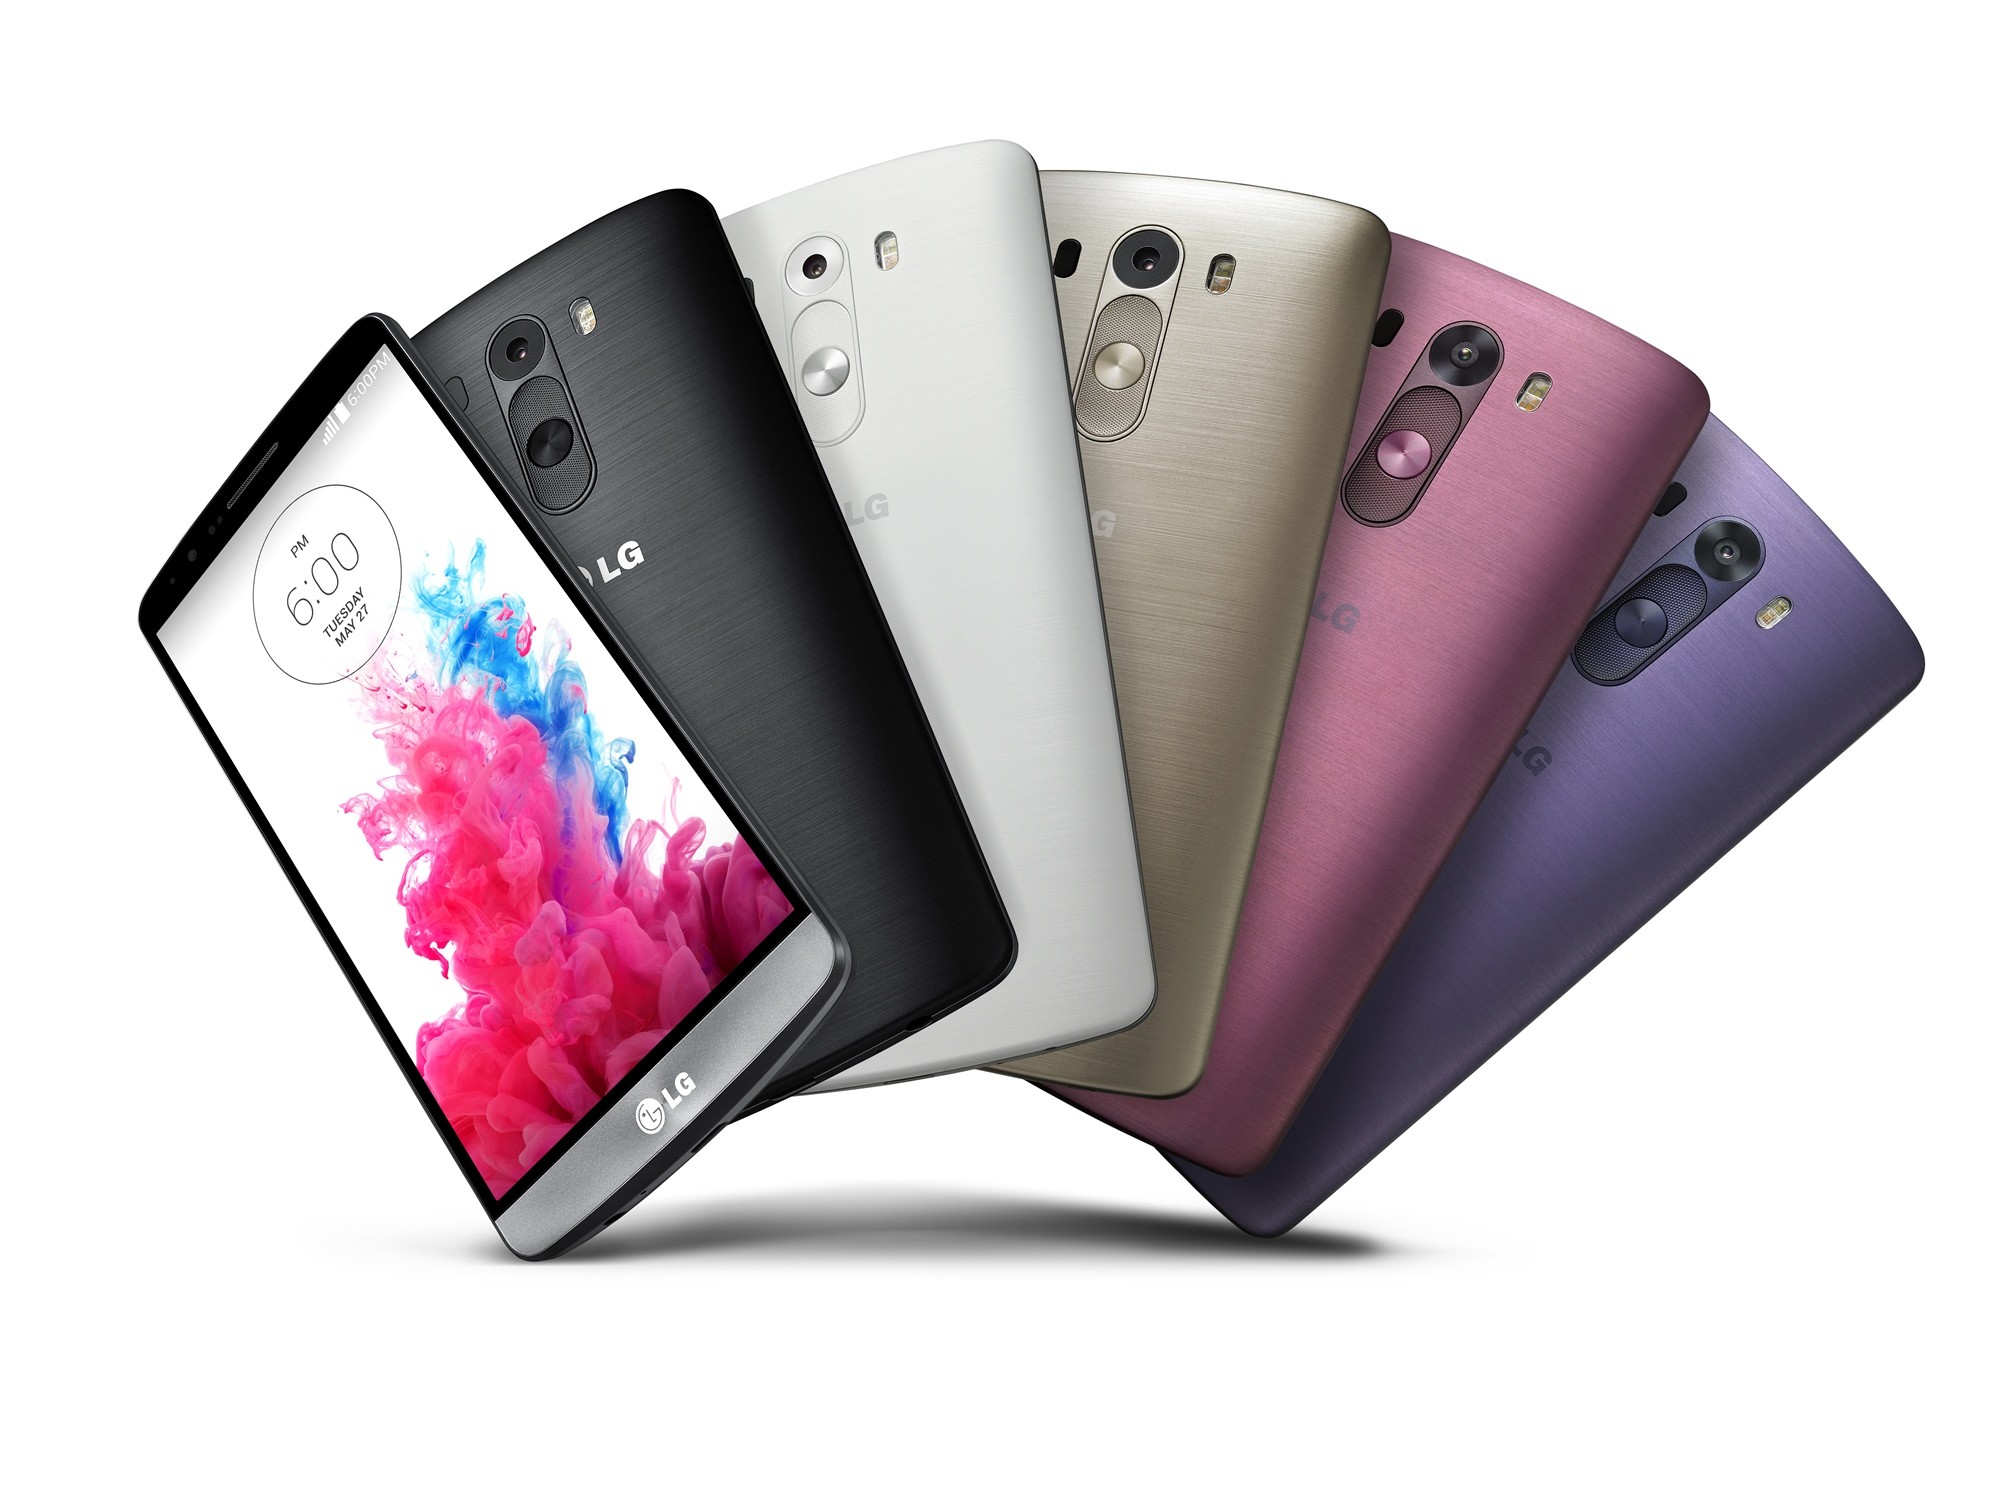 2000x1505 Download: All the high-resolution wallpapers from the LG G3